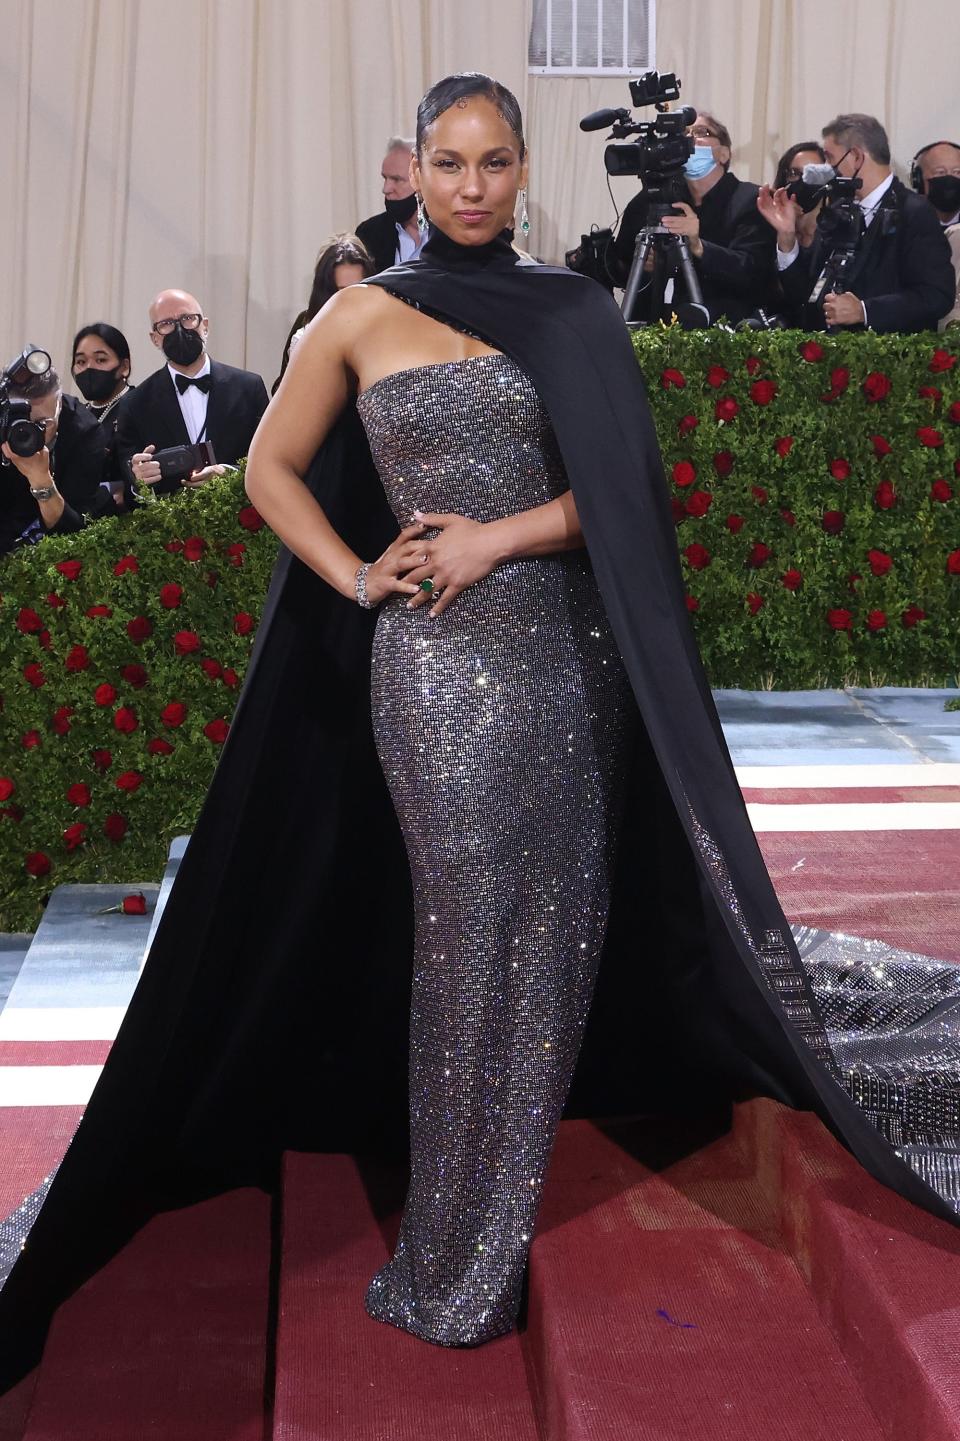 Alicia Keys in a sparkling black dress at the 2022 Met Gala